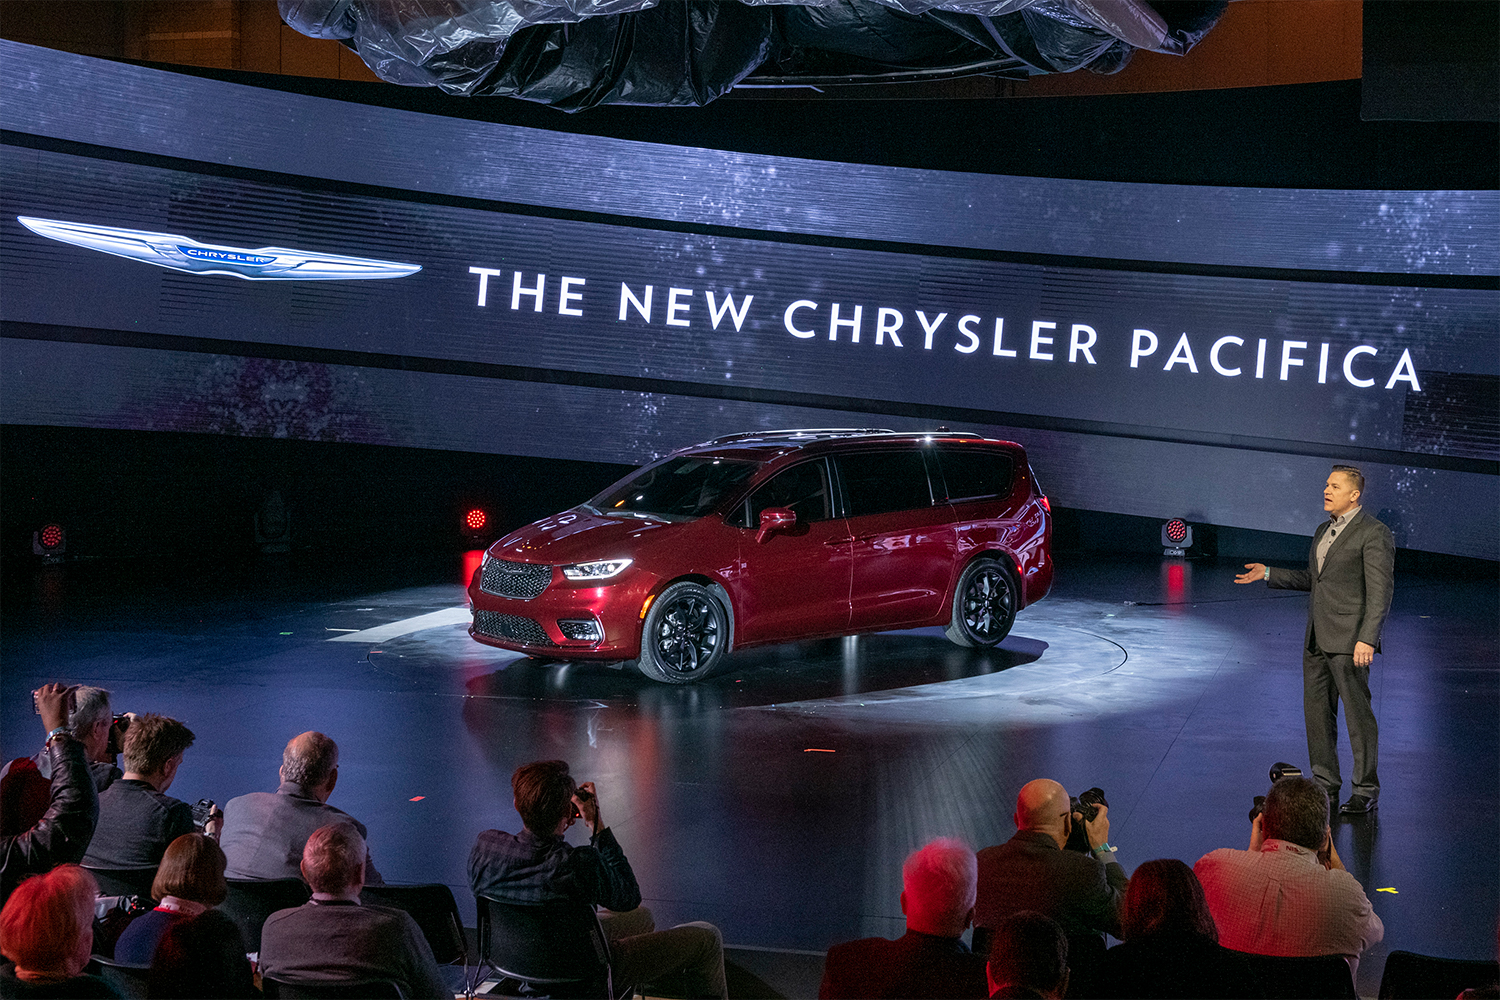 The new Chrysler Pacifica minivan in red debuting at the Chicago Auto Show. Could it be turned into an EV?